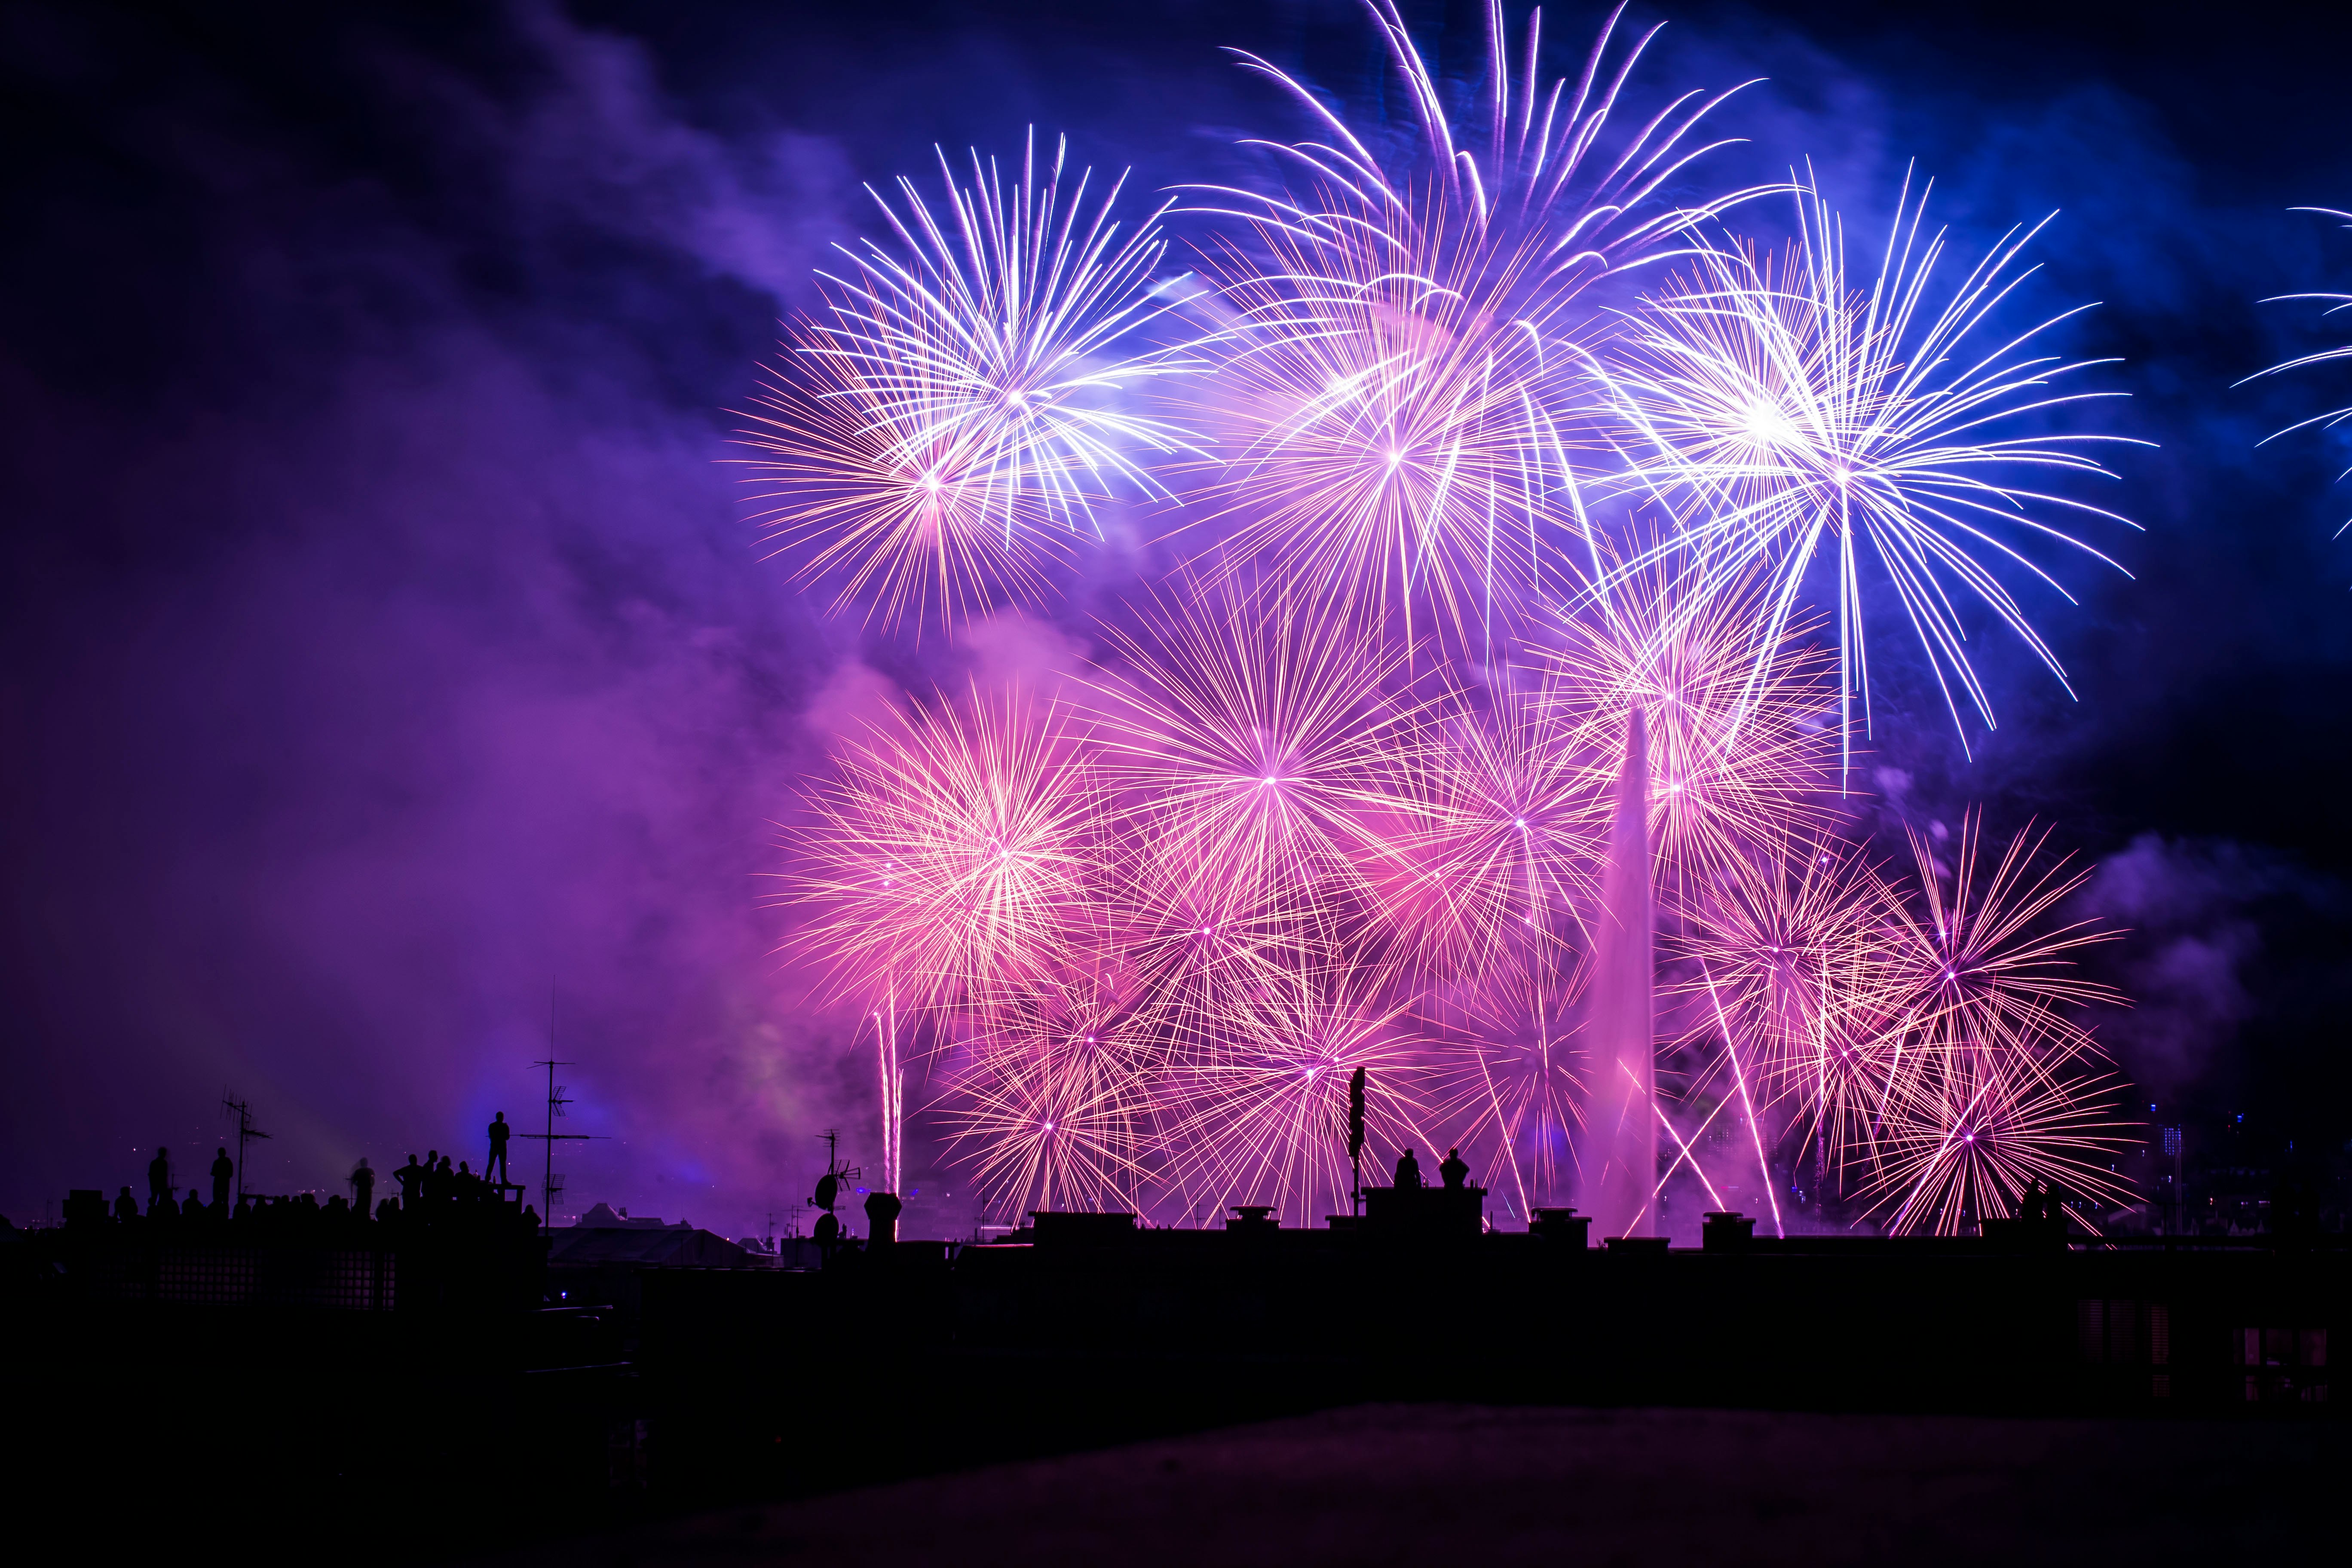 silhouette of buildings with purple and pink fireworks display